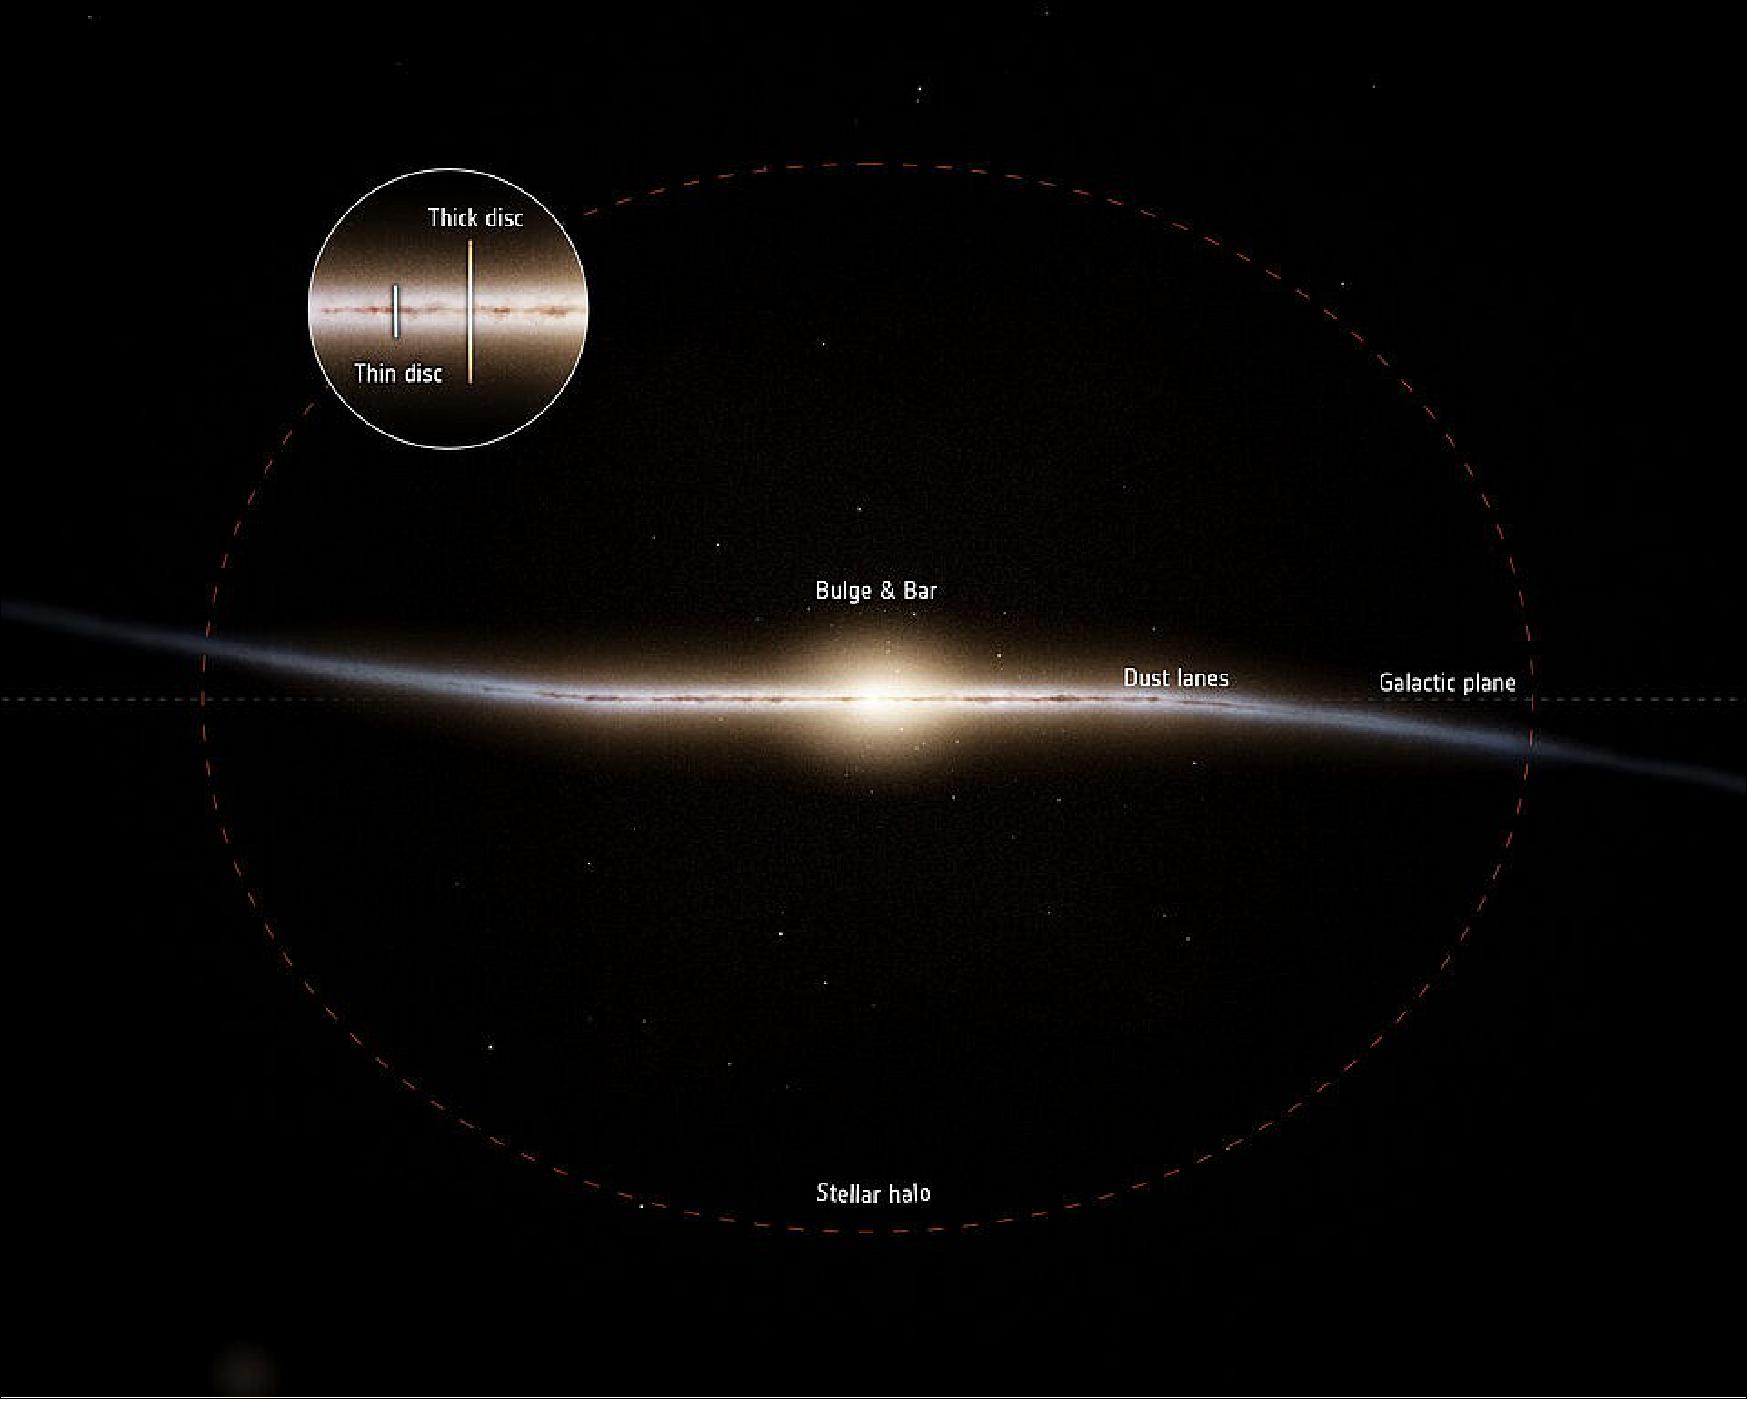 Figure 29: Basic structure of our home galaxy, edge-on view. The new results from ESA's Gaia mission provide for a reconstruction of the history of the Milky Way, in particular of the evolution of the so-called thick disc (image credit: Stefan Payne-Wardenaar / MPIA)